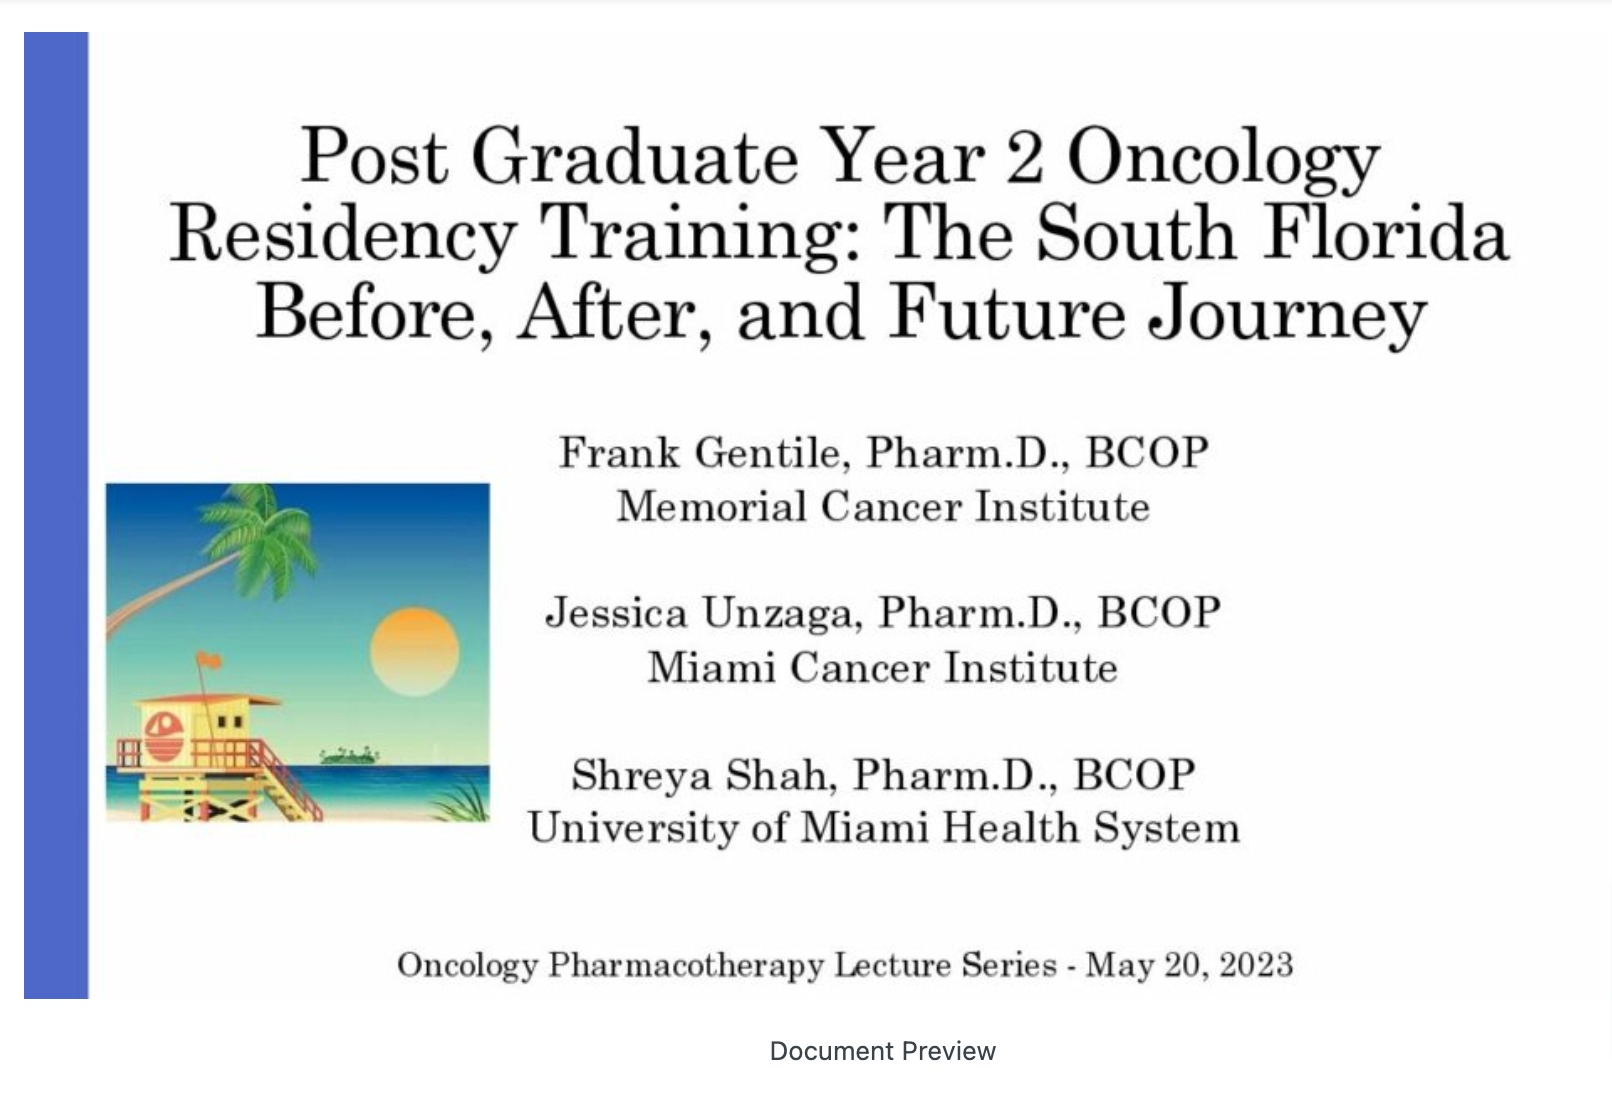 Post Graduate Year II Oncology Residency Training; the South Florida Before, After, and Future Journey